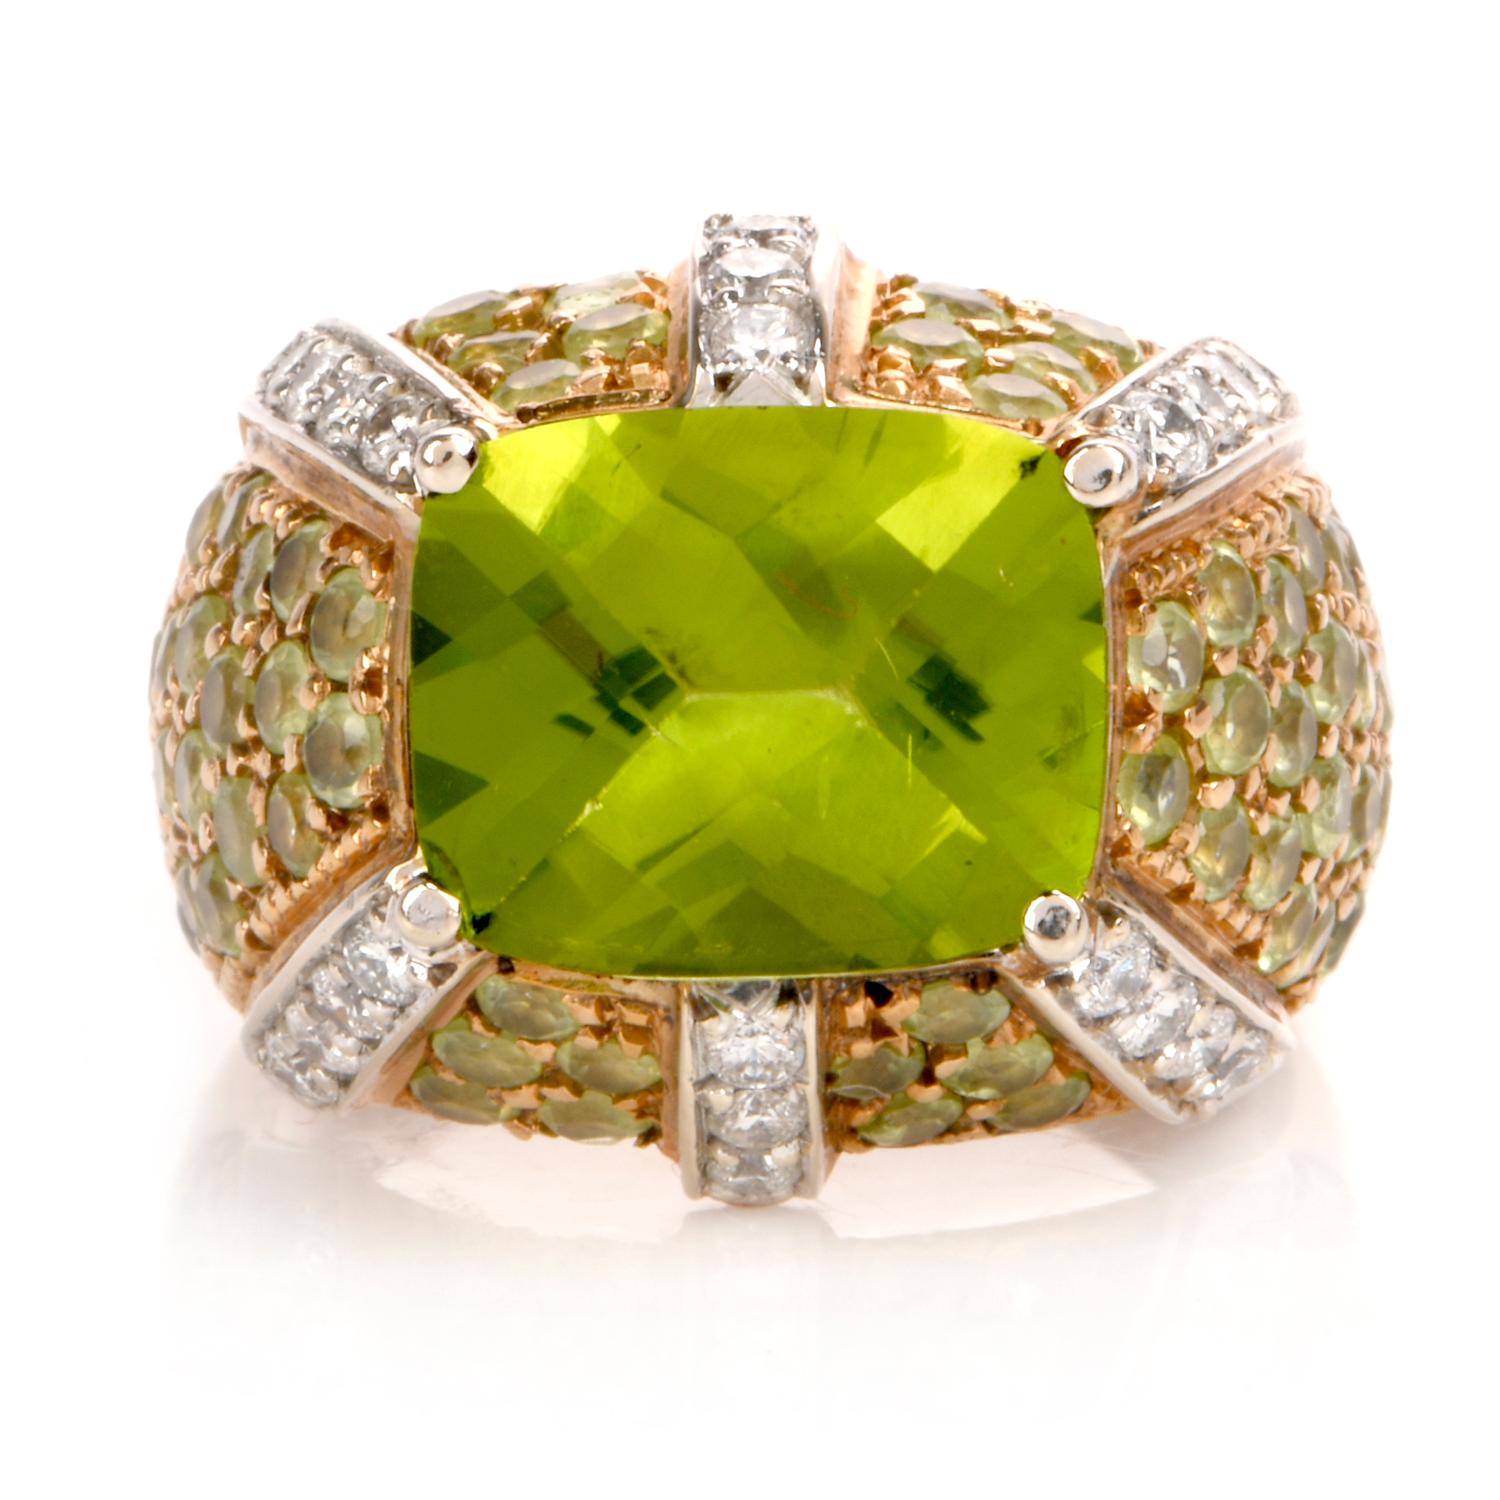 This fashionable peridot and diamond dome cocktail ring is crafted in solid 18-karat yellow gold, weighing approx. 8.3 grams and measuring 16mm x 6mm. Showcasing a prominent centered cushion cut prong-set peridot weighing approx 3.10 carats.